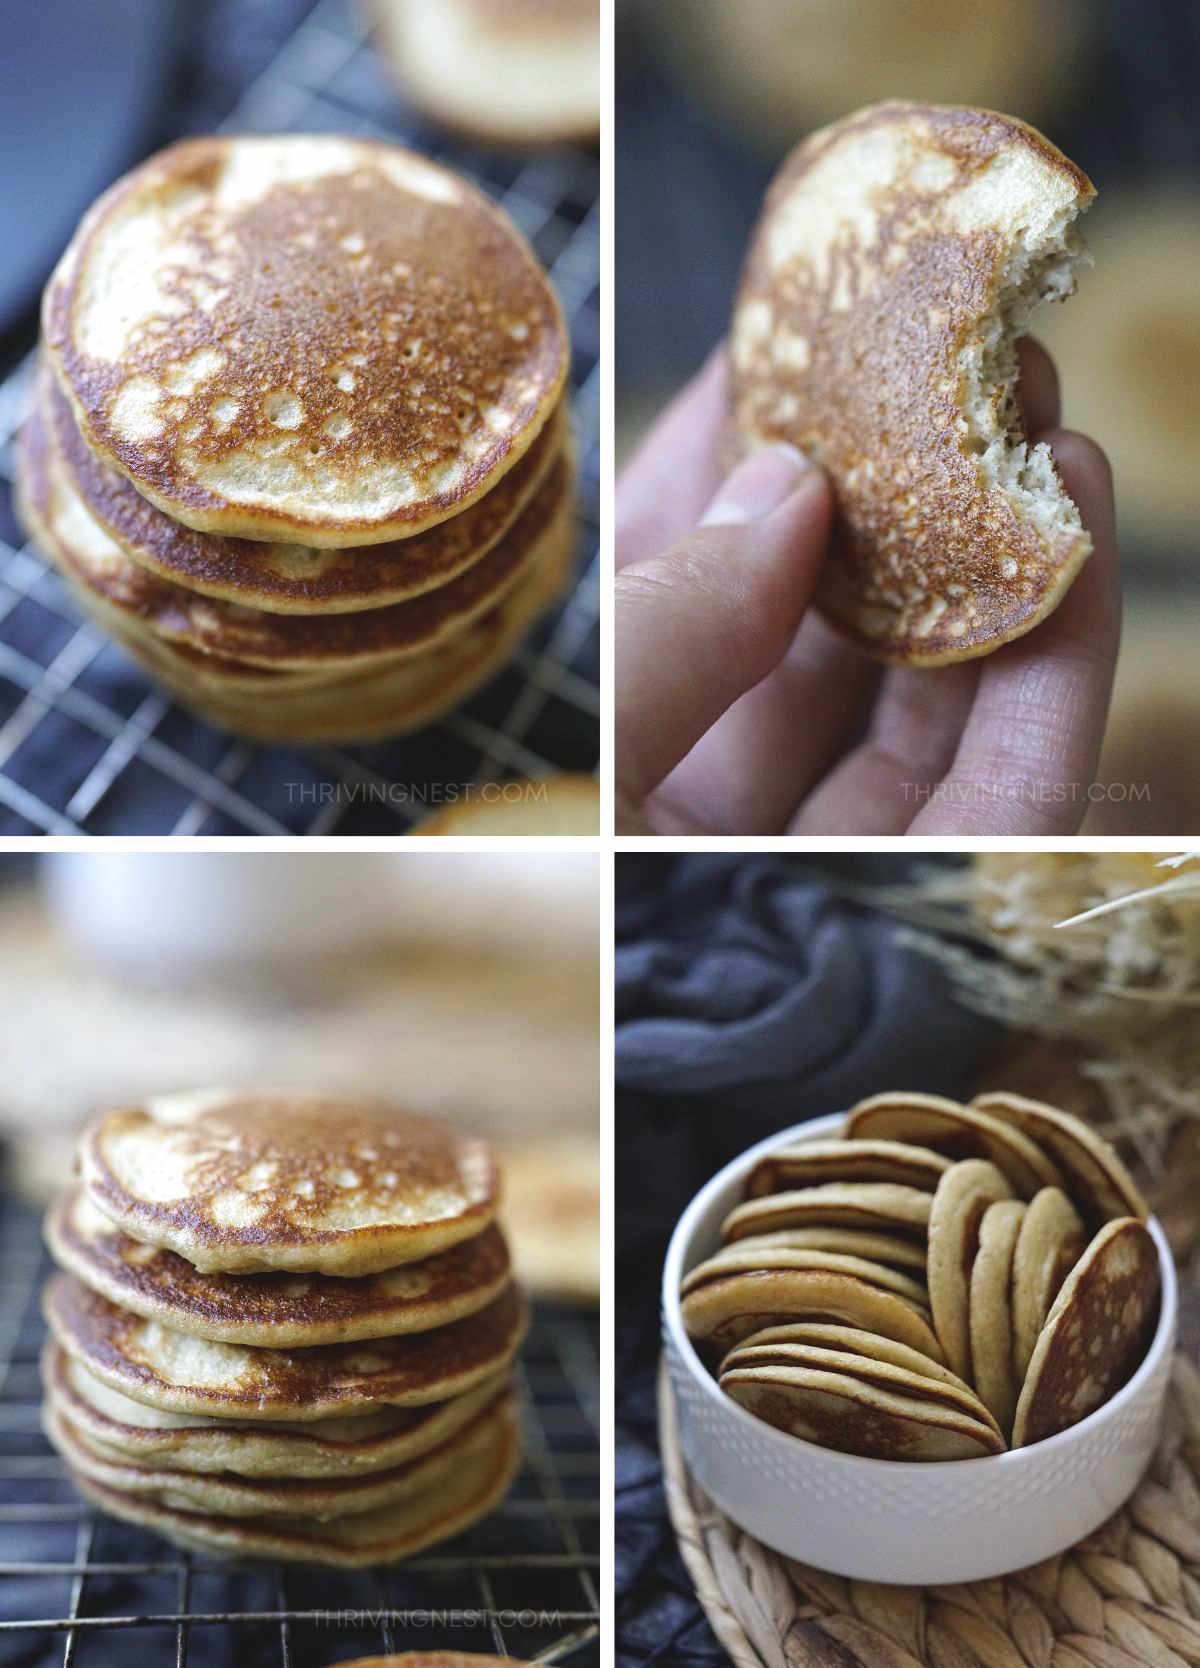 Showing the Baby banana oat pancakes  up close and their fluffy texture inside.